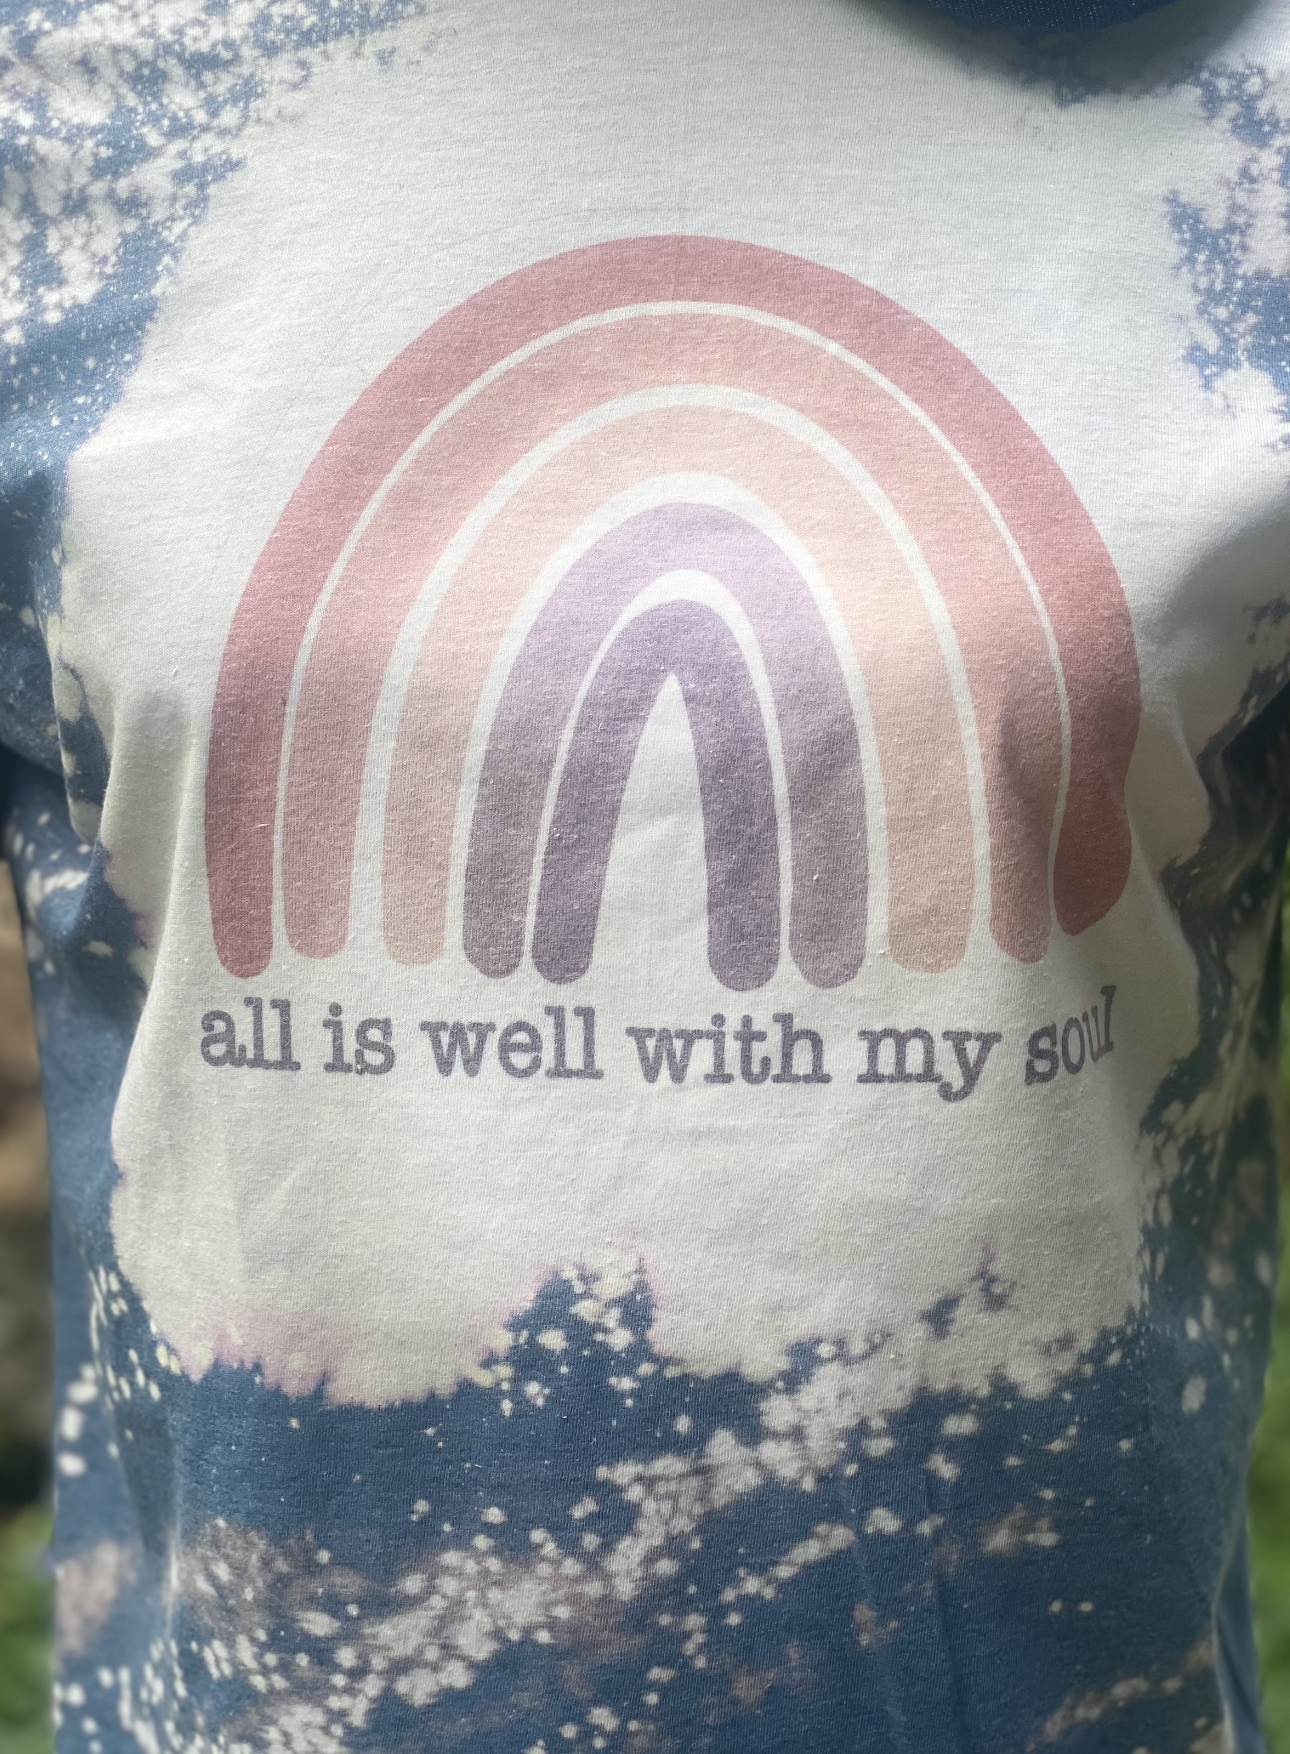 All is well with my soul T-shirt